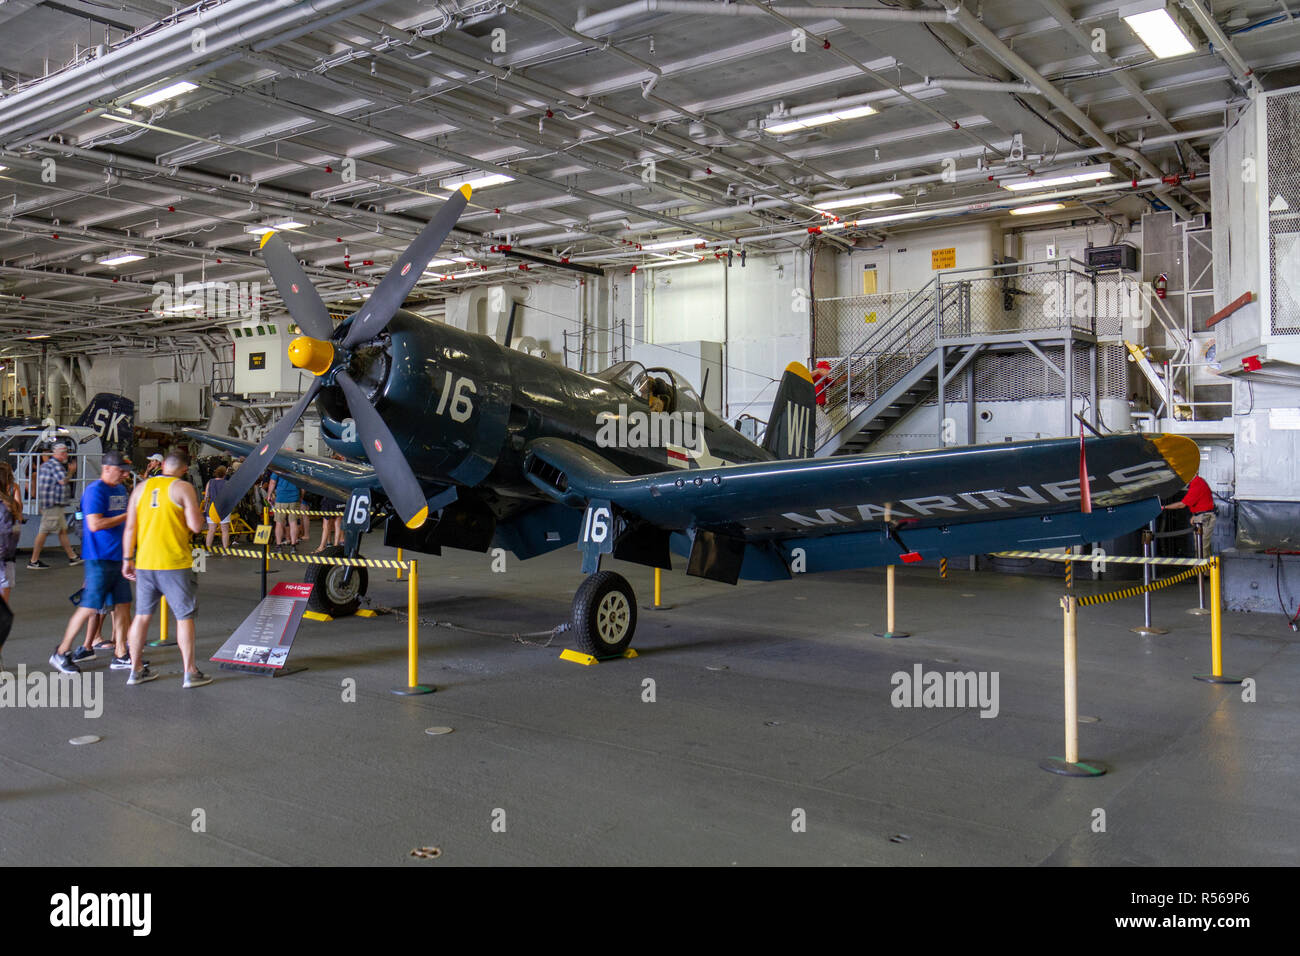 A F4U-4 Corsair fighter aircraft from World War II below decks on the USS Midway, San Diego, California, United States. Stock Photo